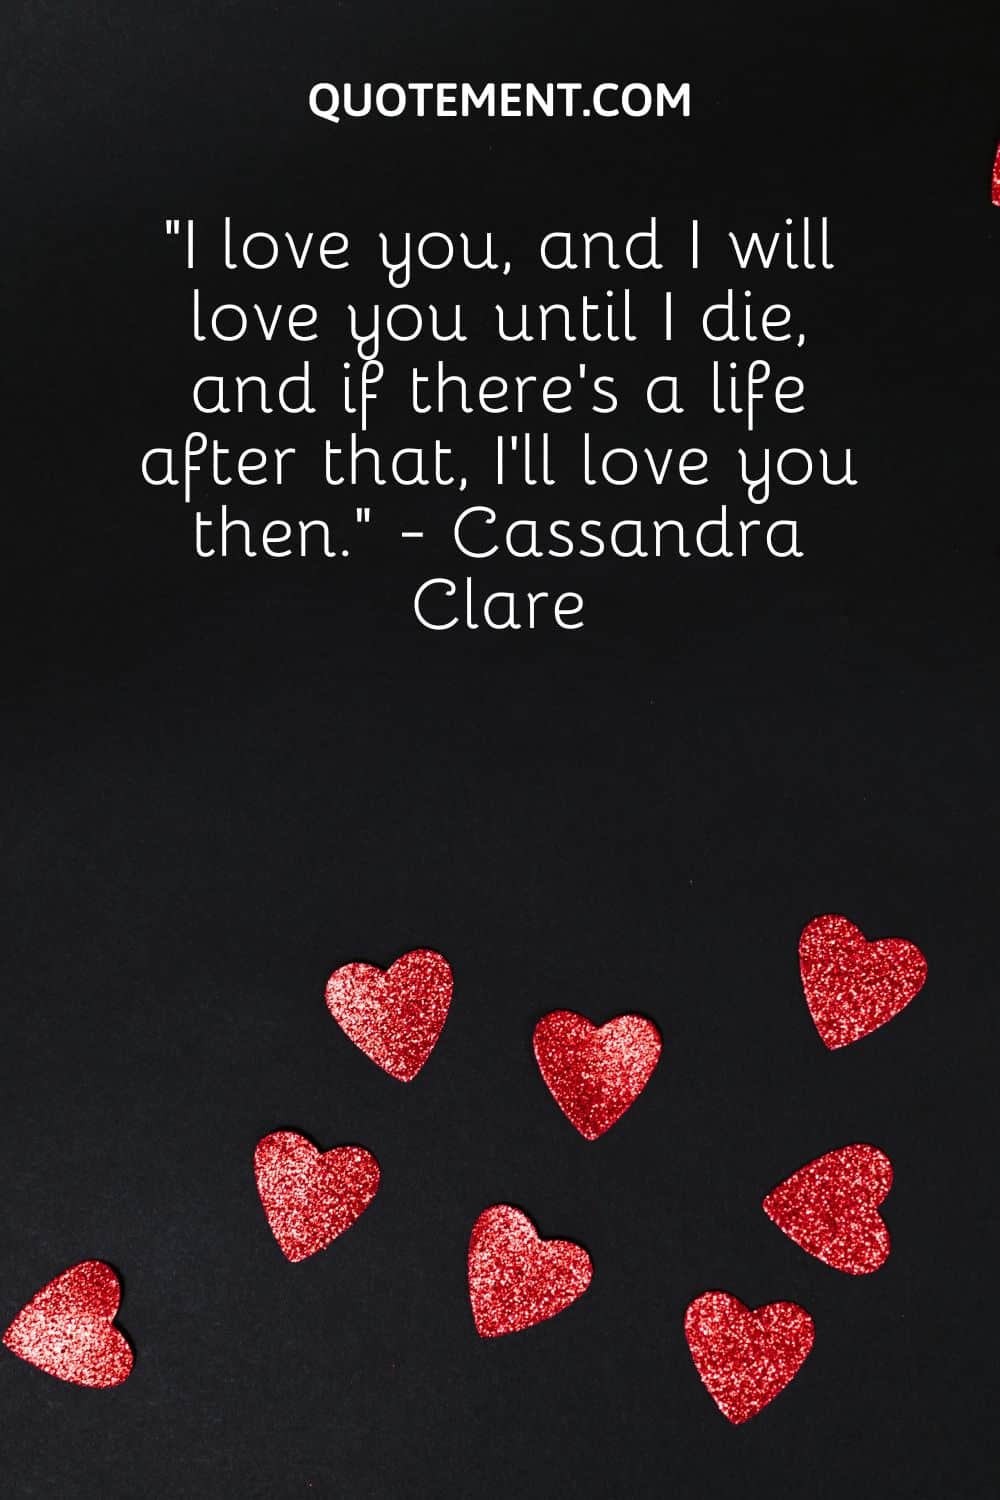 “I love you, and I will love you until I die, and if there’s a life after that, I’ll love you then.” - Cassandra Clare